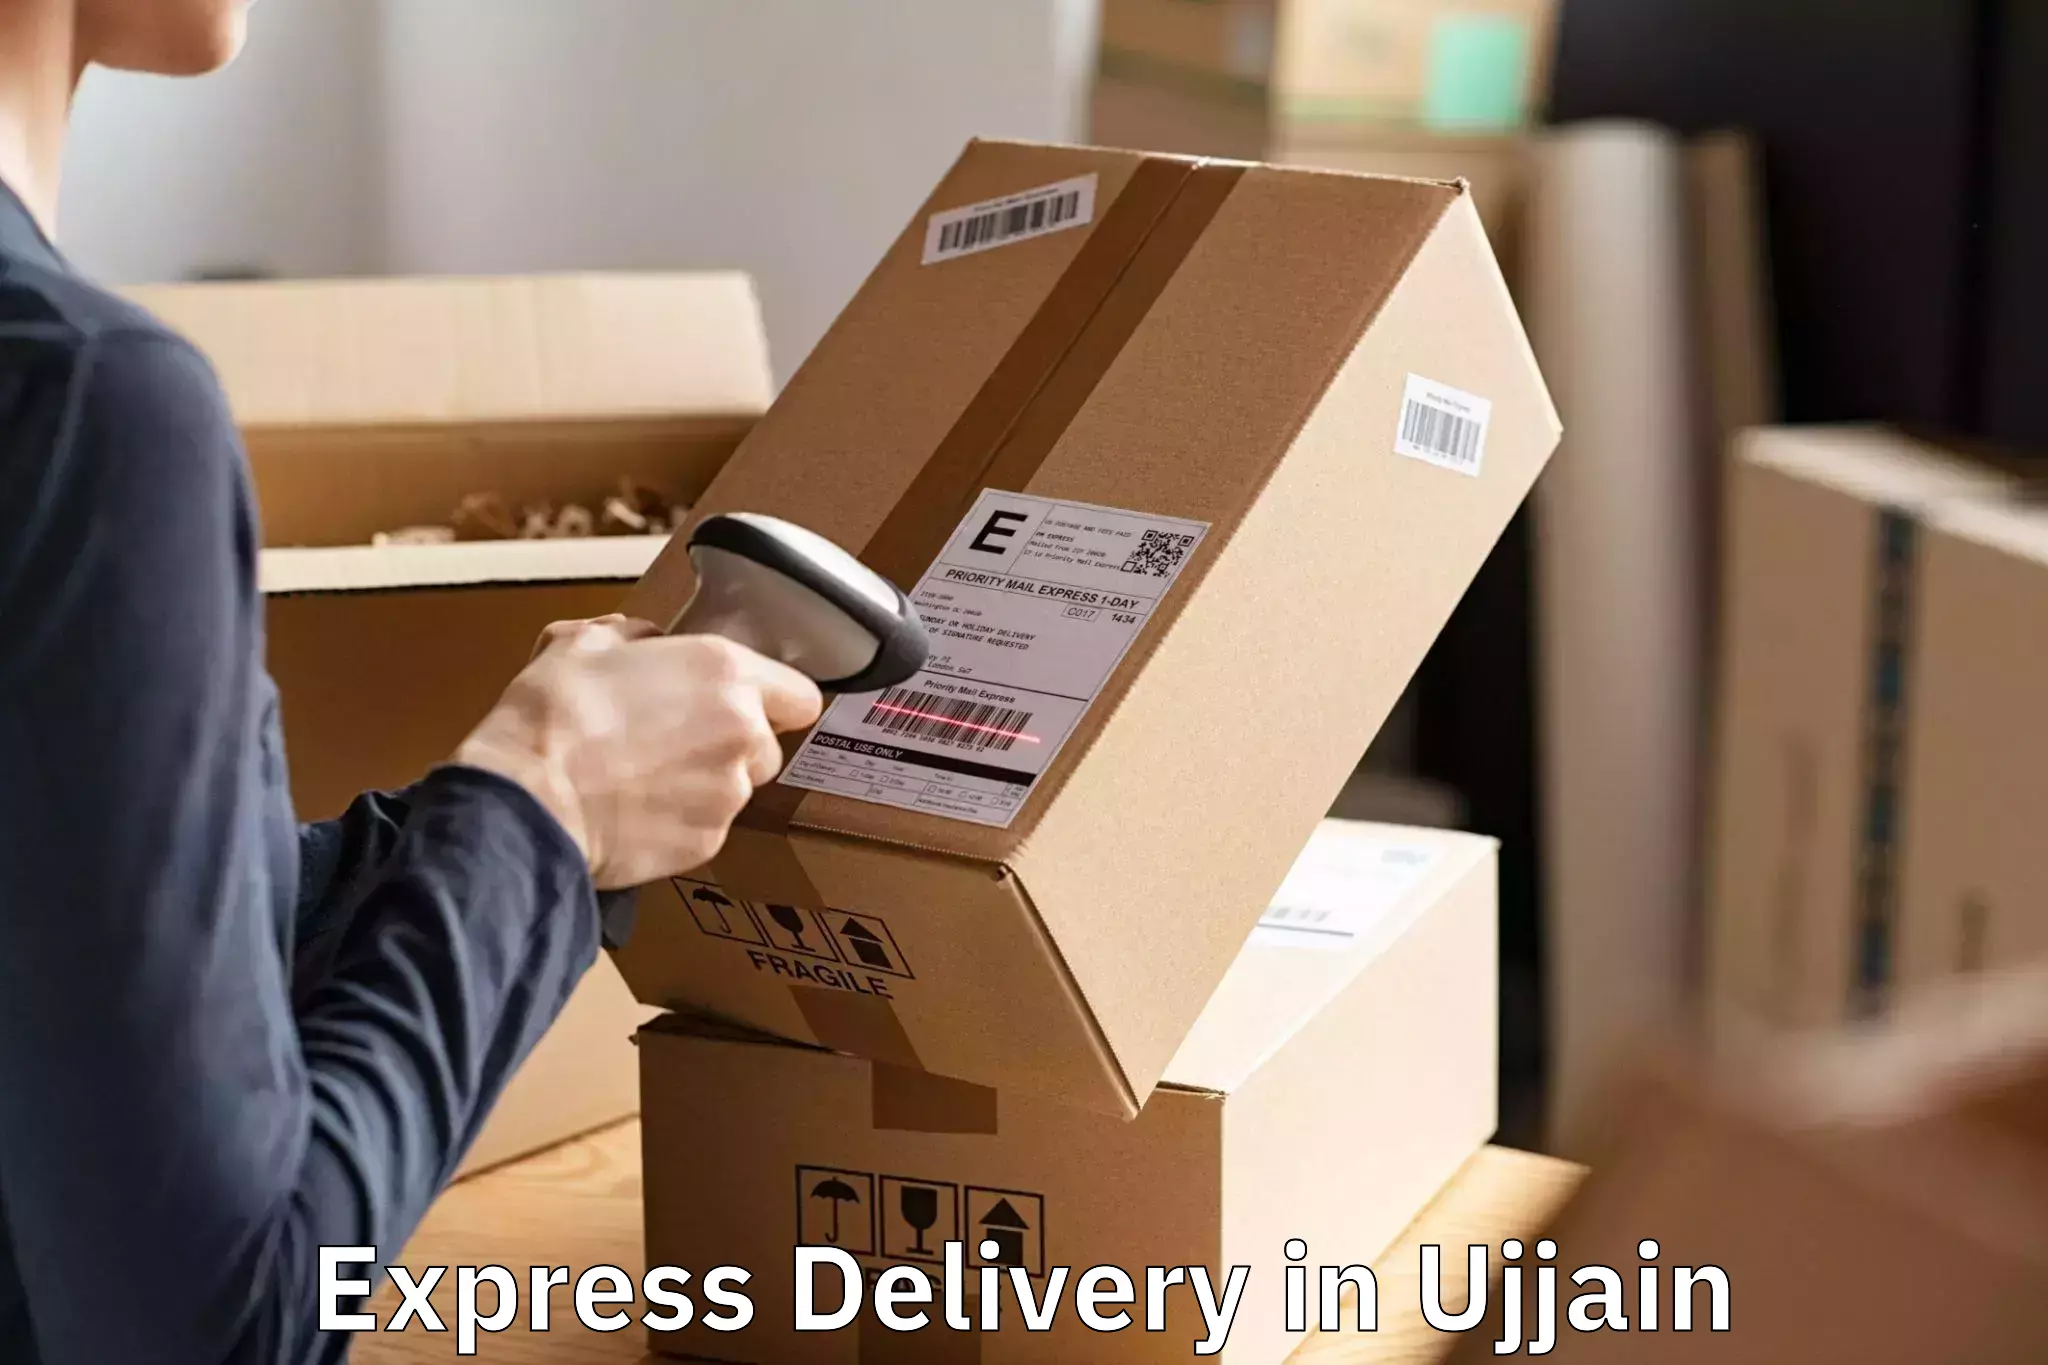 Reliable Express Delivery Available in Ujjain, Madhya Pradesh (MP)